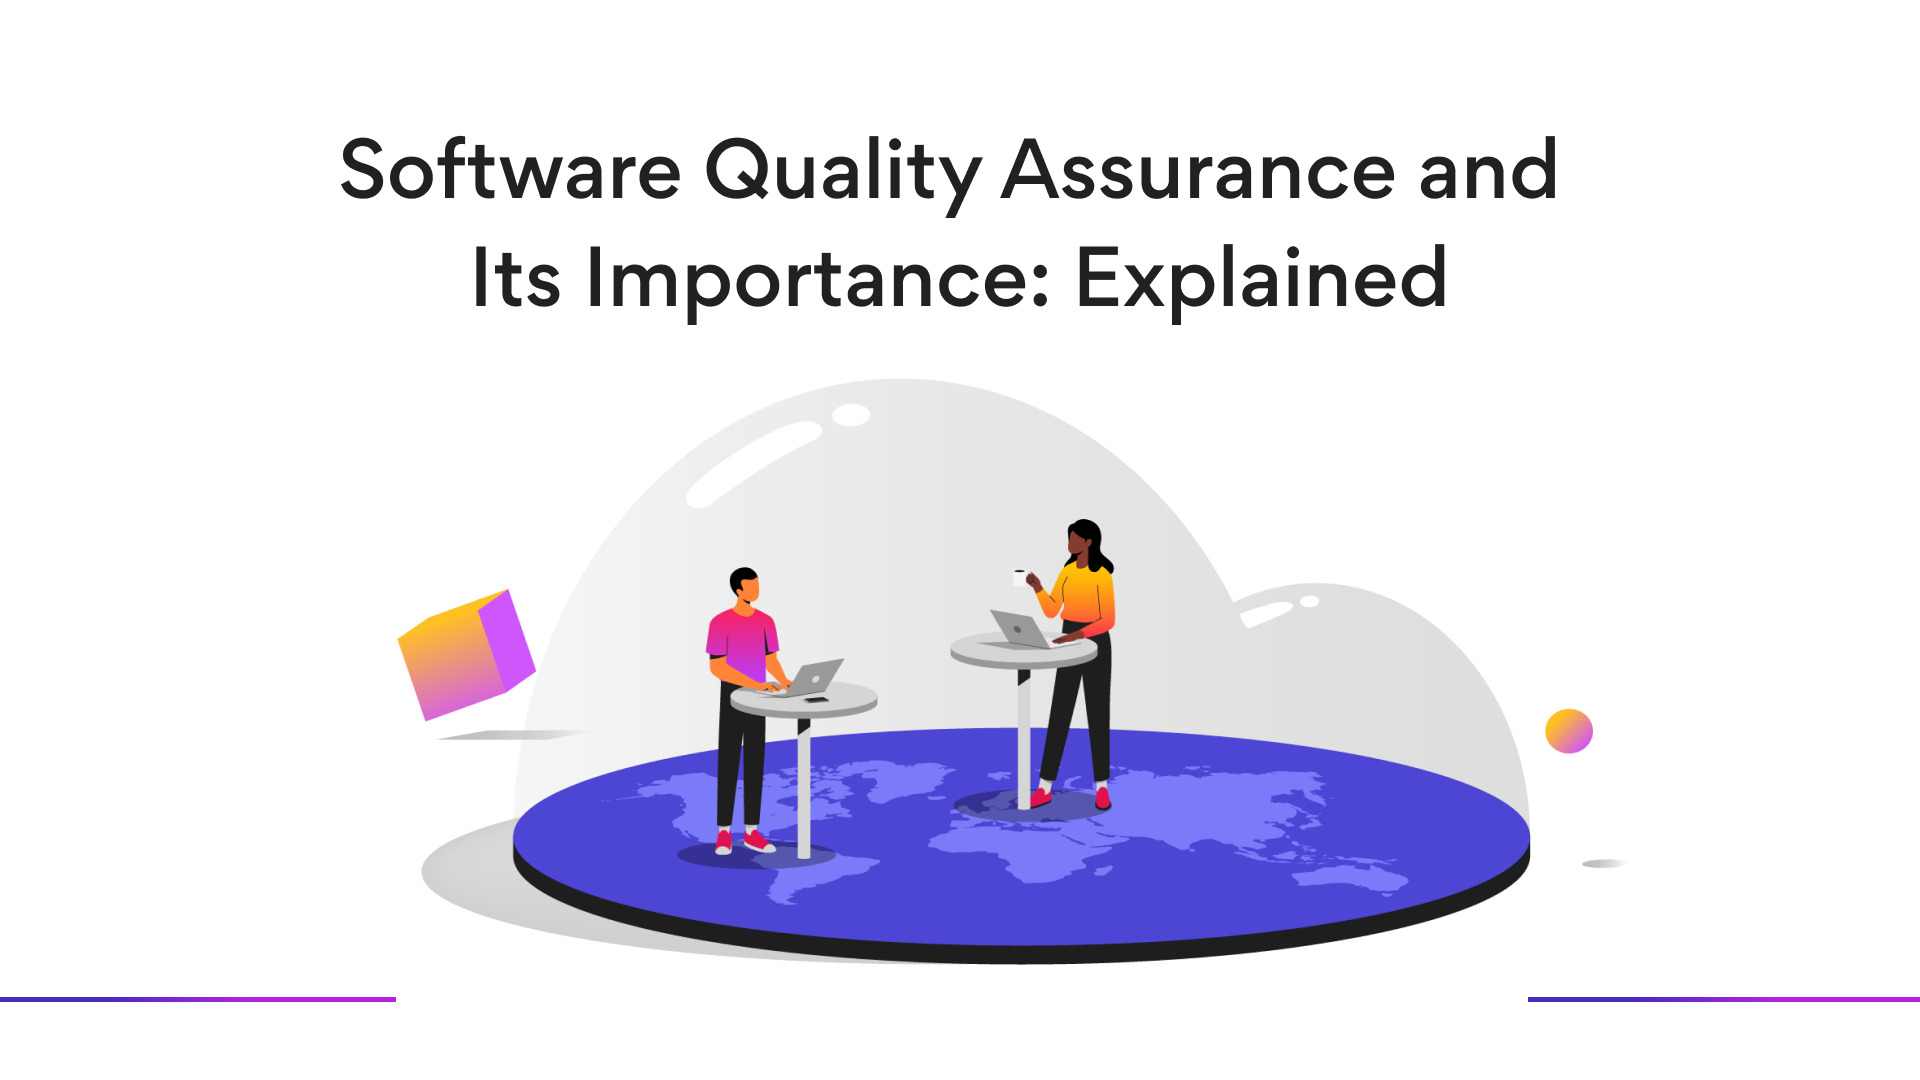 Software quality assurance and its importance